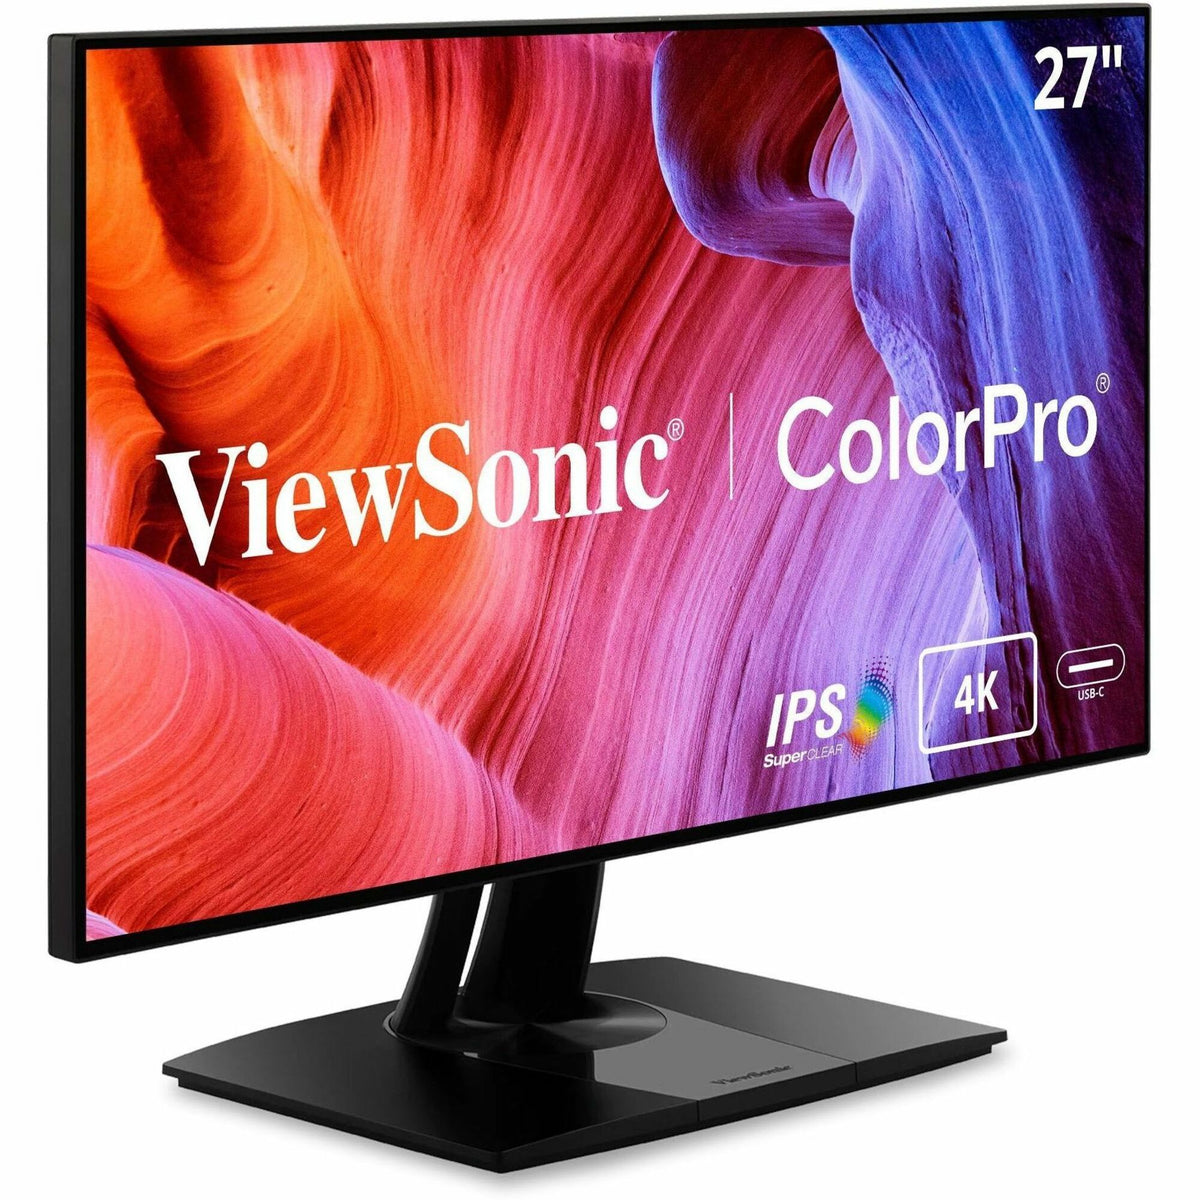 ViewSonic VP2768a-4K 27 Inch Premium IPS 4K Monitor with Advanced Ergonomics, ColorPro 100% sRGB Rec 709, 14-bit 3D LUT, Eye Care, HDMI, USB C, DisplayPort for Professional Home and Office - VP2768A-4K